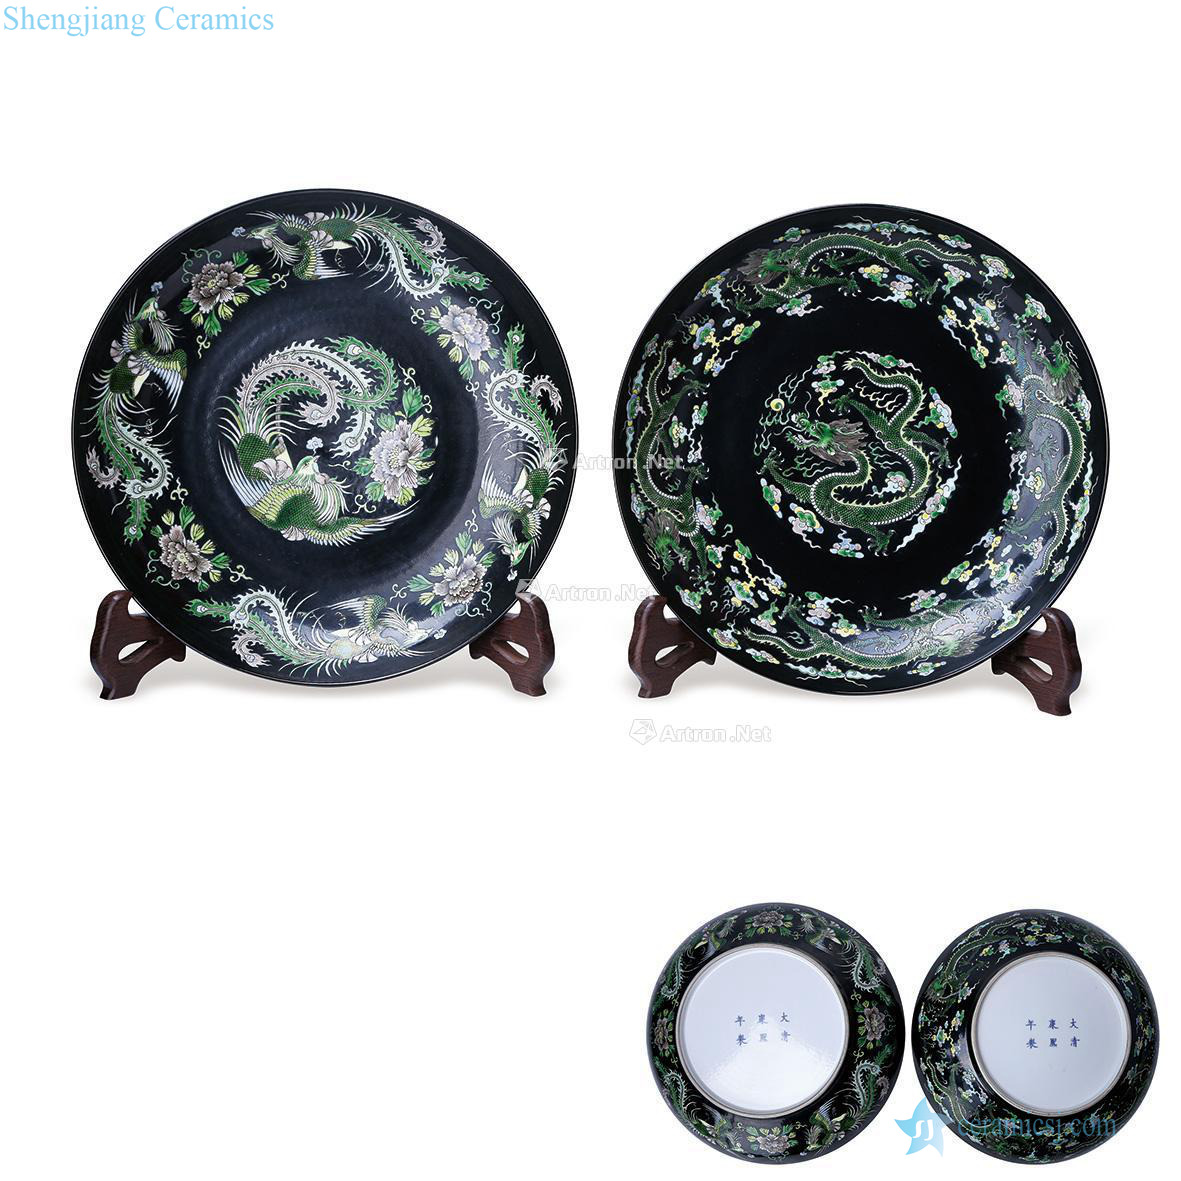 The qing emperor kangxi to colorful ink longfeng pattern plate